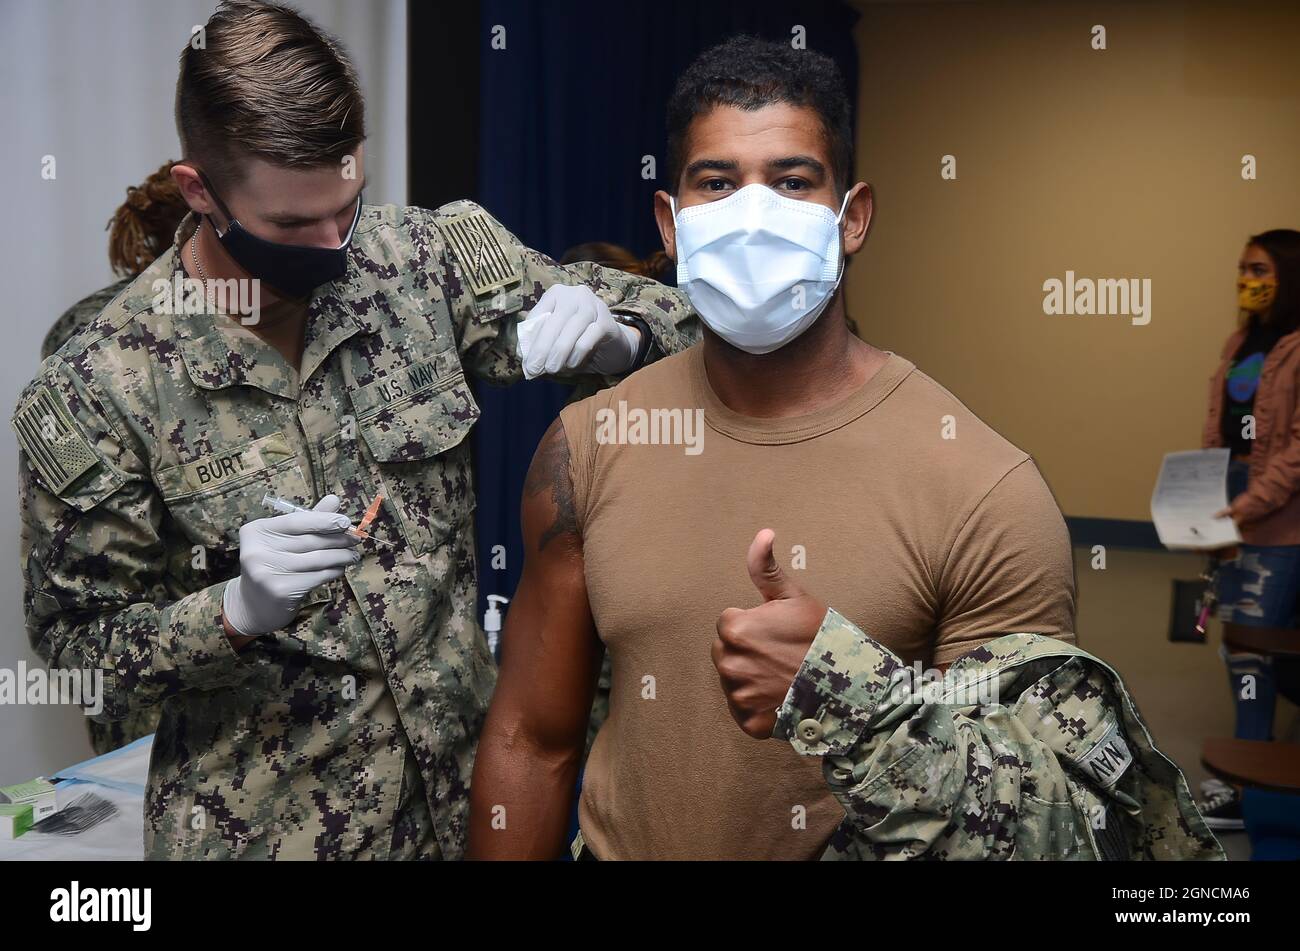 CORPUS CHRISTI, Texas (Sept. 30, 2020) Hospitalman Brandon Burt administers an influenza vaccination to Hospitalman Edward Roy during a flu shot standdown at Navy Medicine Readiness and Training Command Corpus Christi. Impacts of the COVID-19 pandemic have stressed the importance of the flu vaccine, and while the COVID-19 and influenza viruses are different, symptoms of the two can look the same, making it difficult to differentiate the two based on symptoms alone. Getting a flu shot now could help reduce the overall impact of contagious respiratory illnesses on the population and decrease the Stock Photo